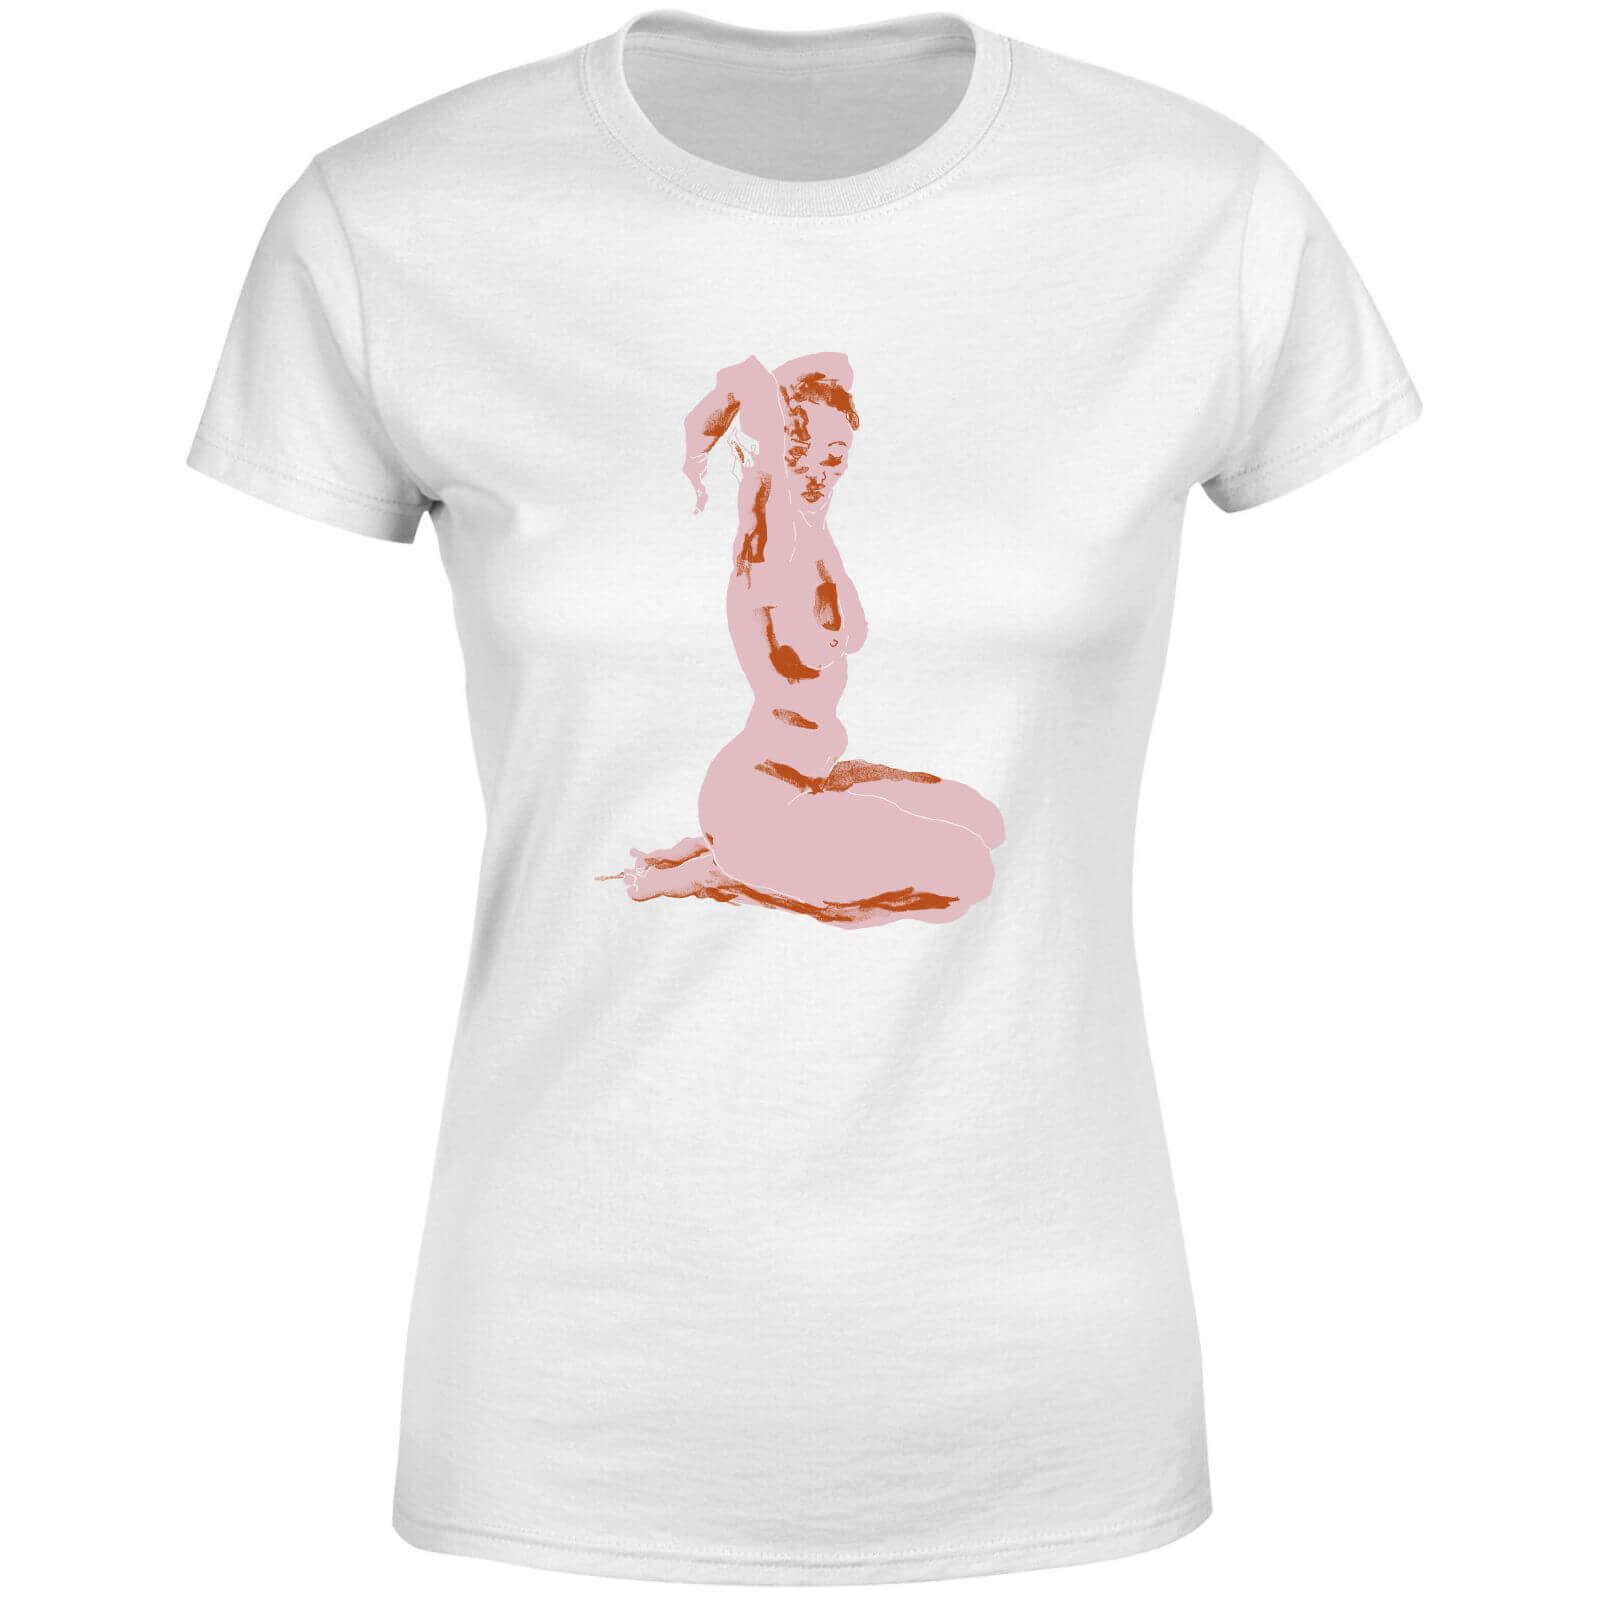 Nude, Arms Folded Over Her Head Women's T-Shirt - White - XS - White